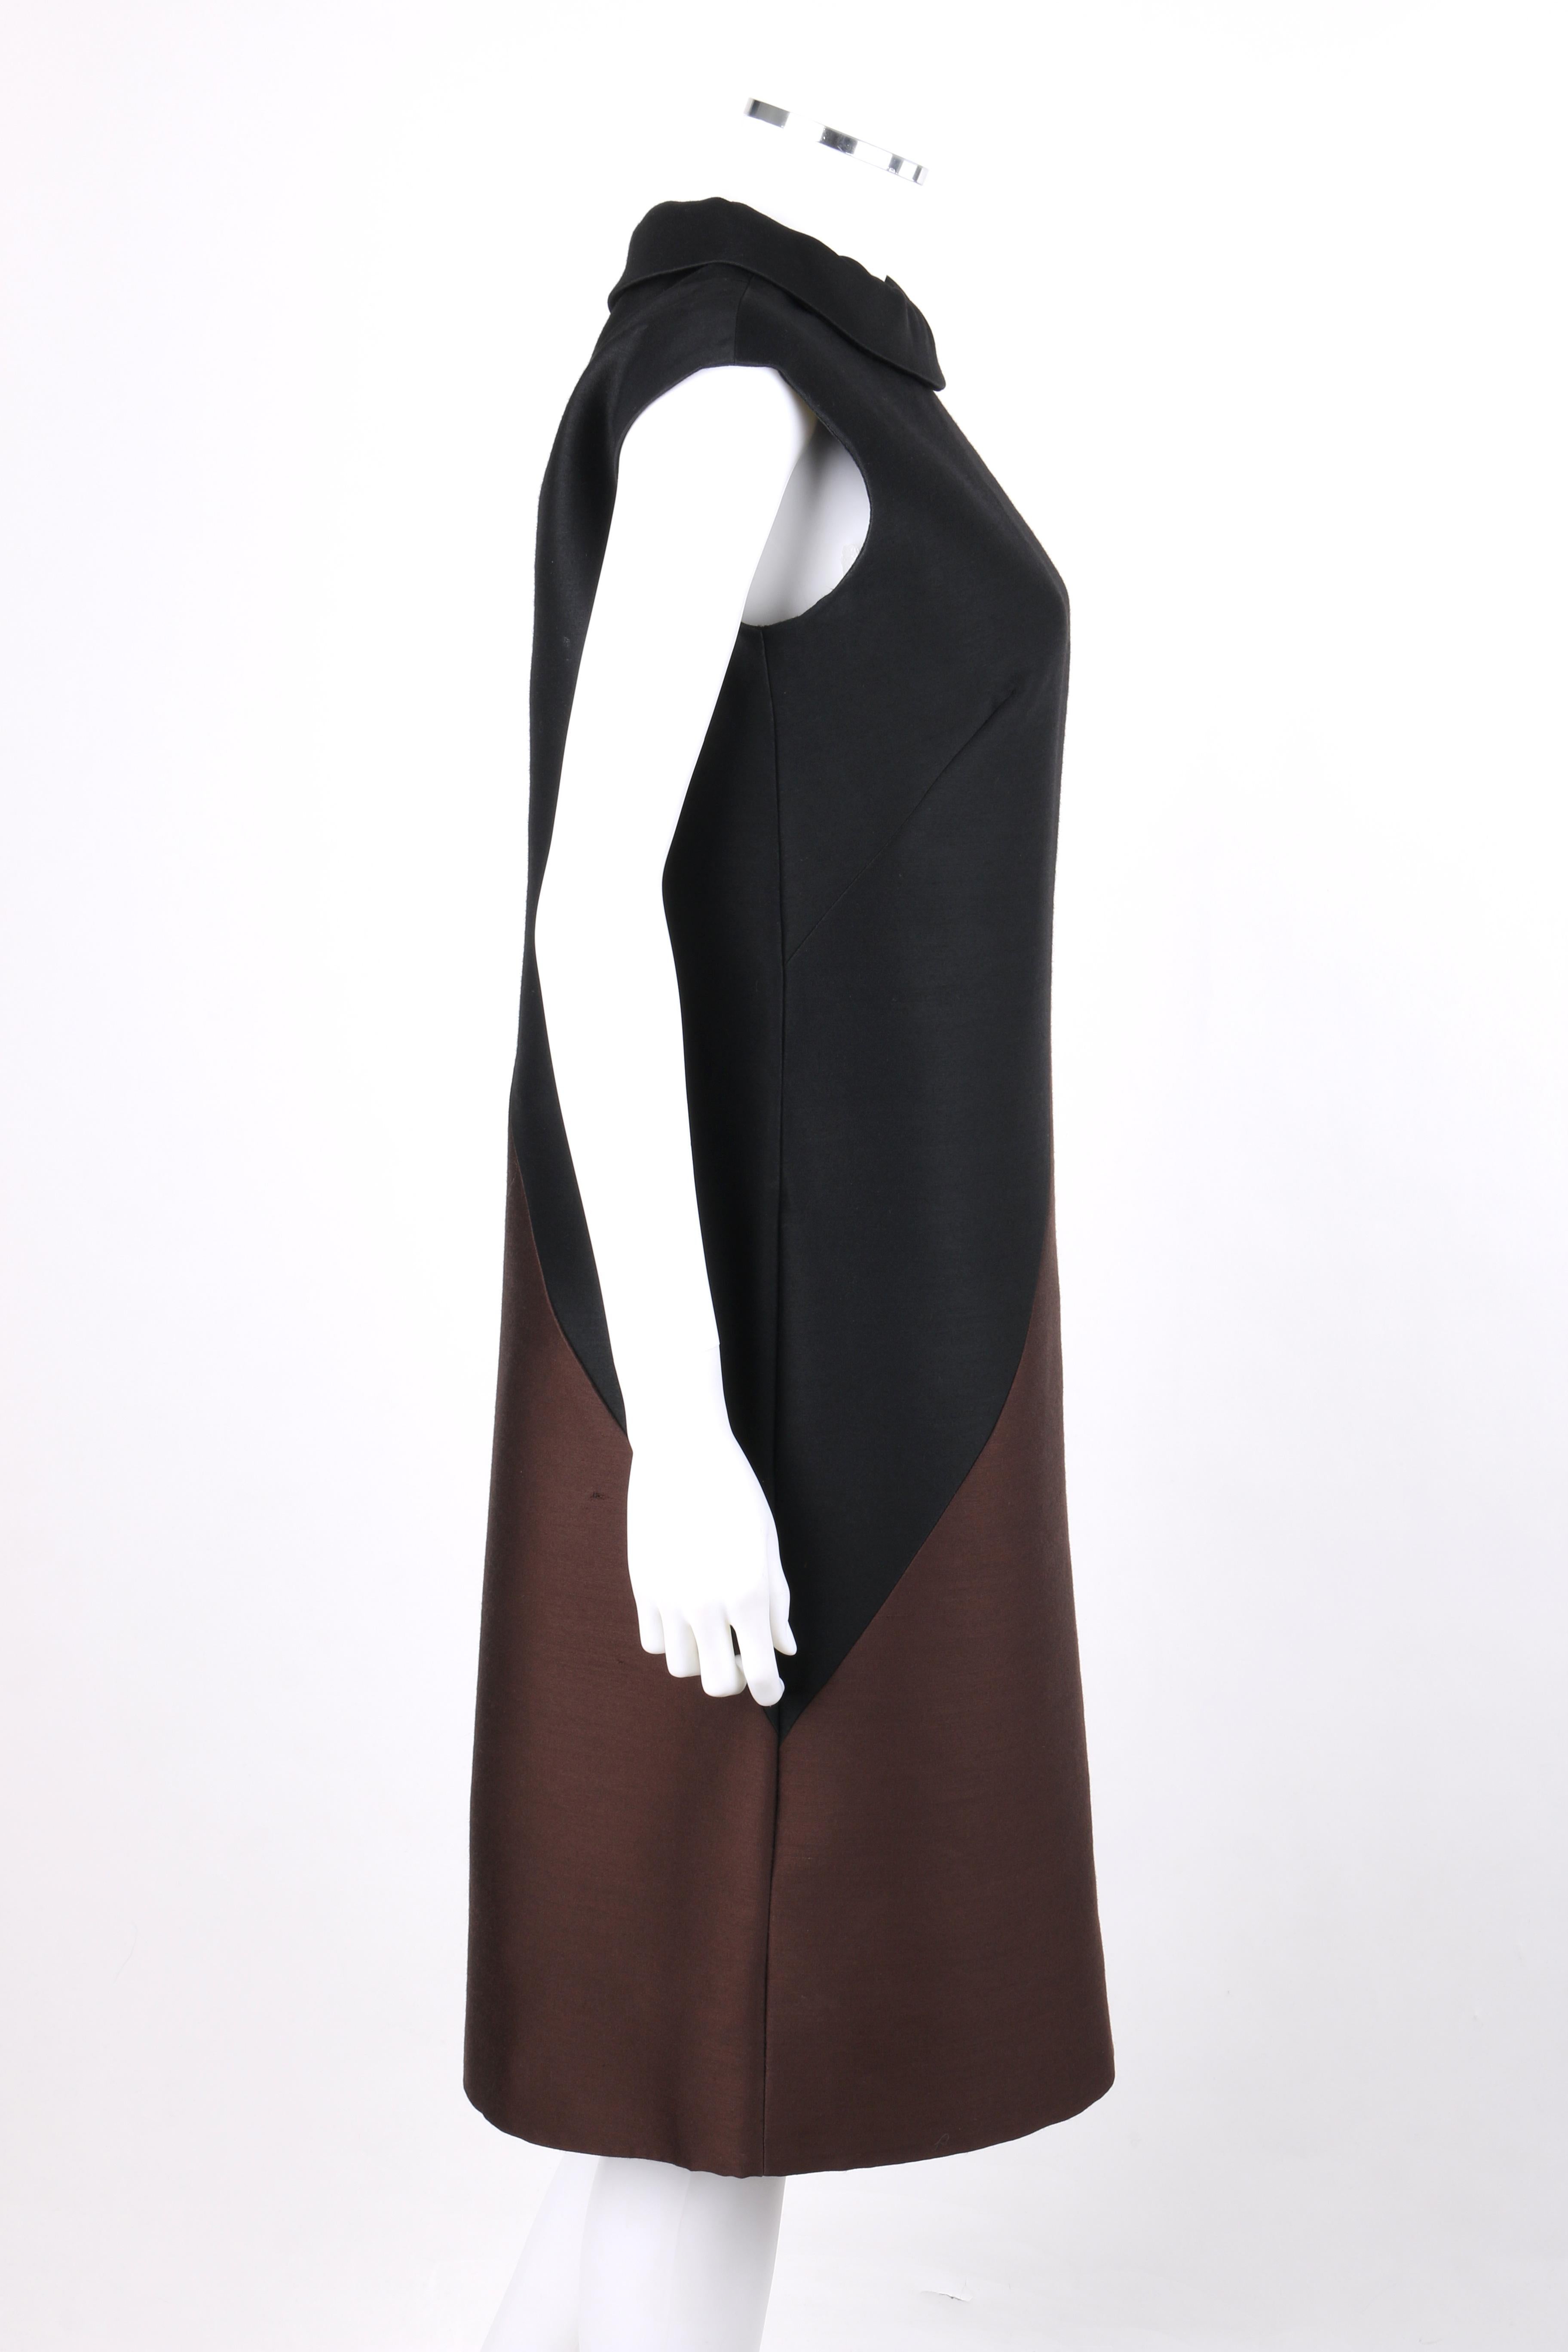 MOE NATHAN New York c.1960’s Brown Black Color Block Mod Sleeveless Shift Dress In Good Condition In Thiensville, WI